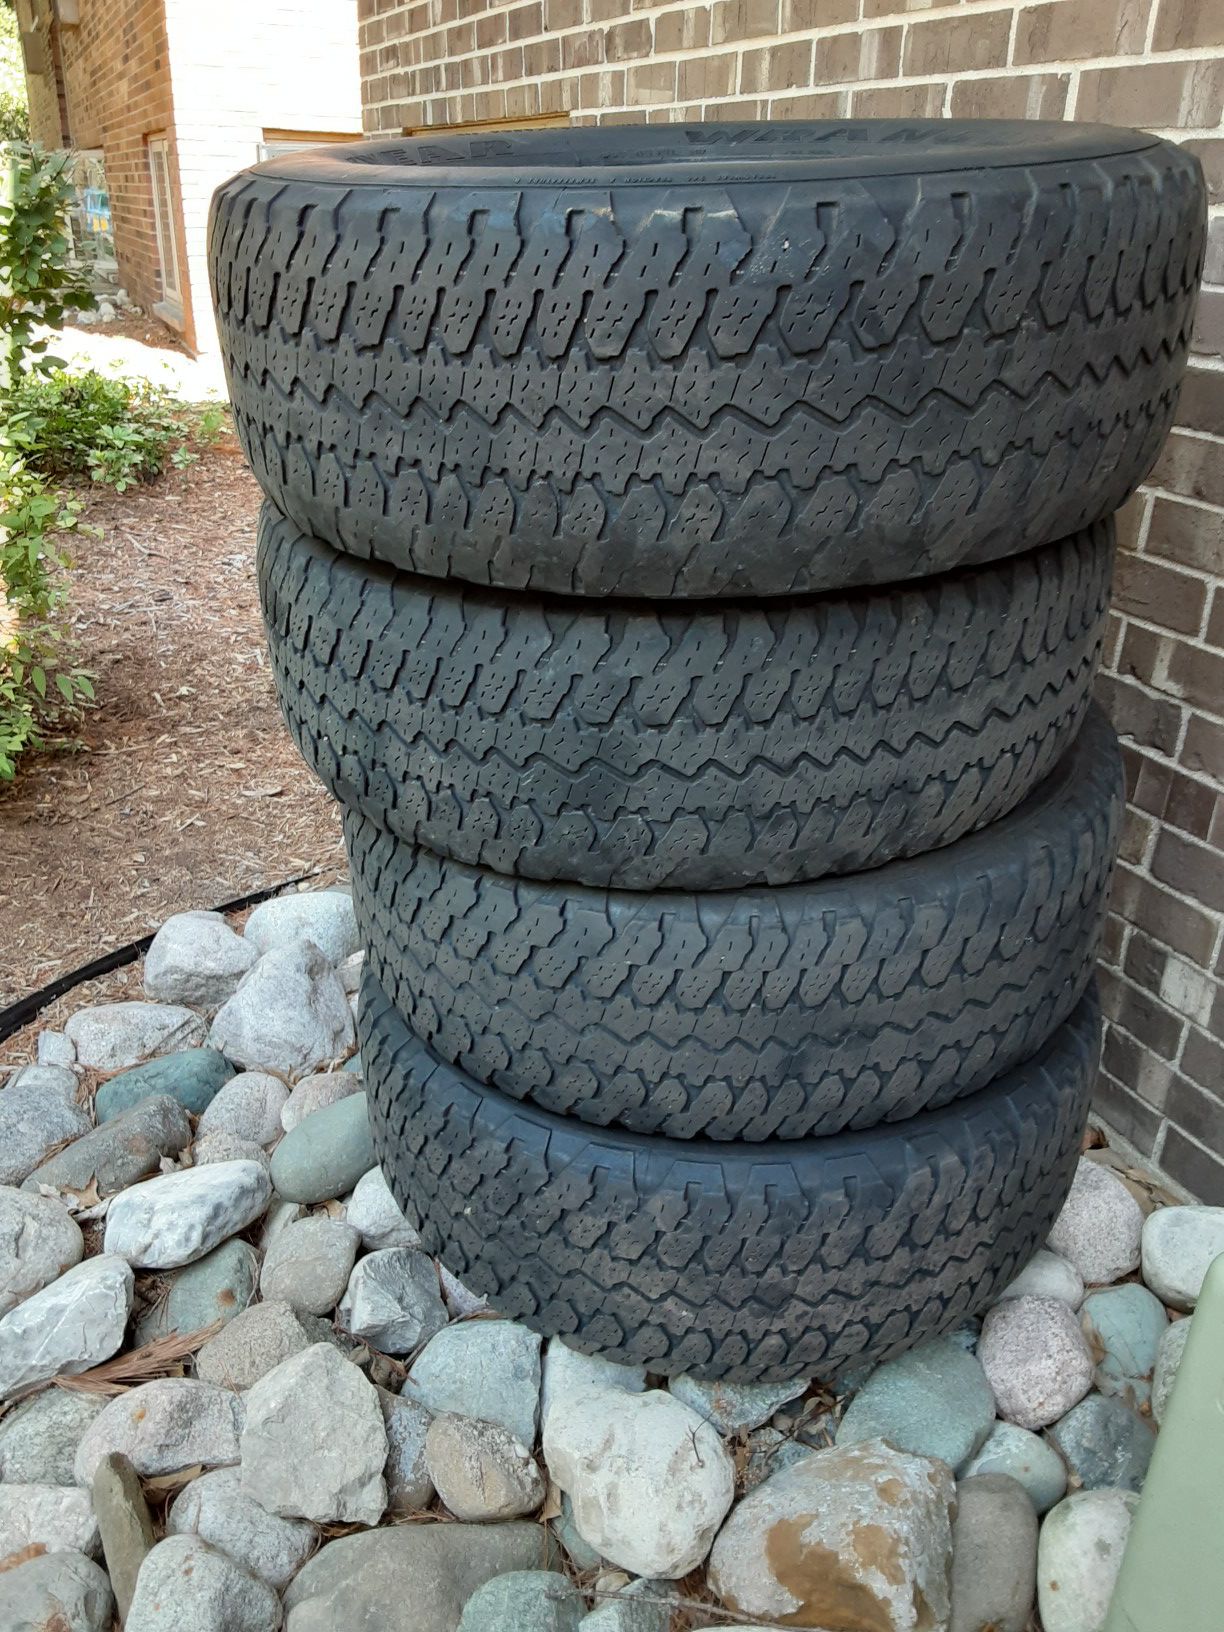 Good Year Used tires